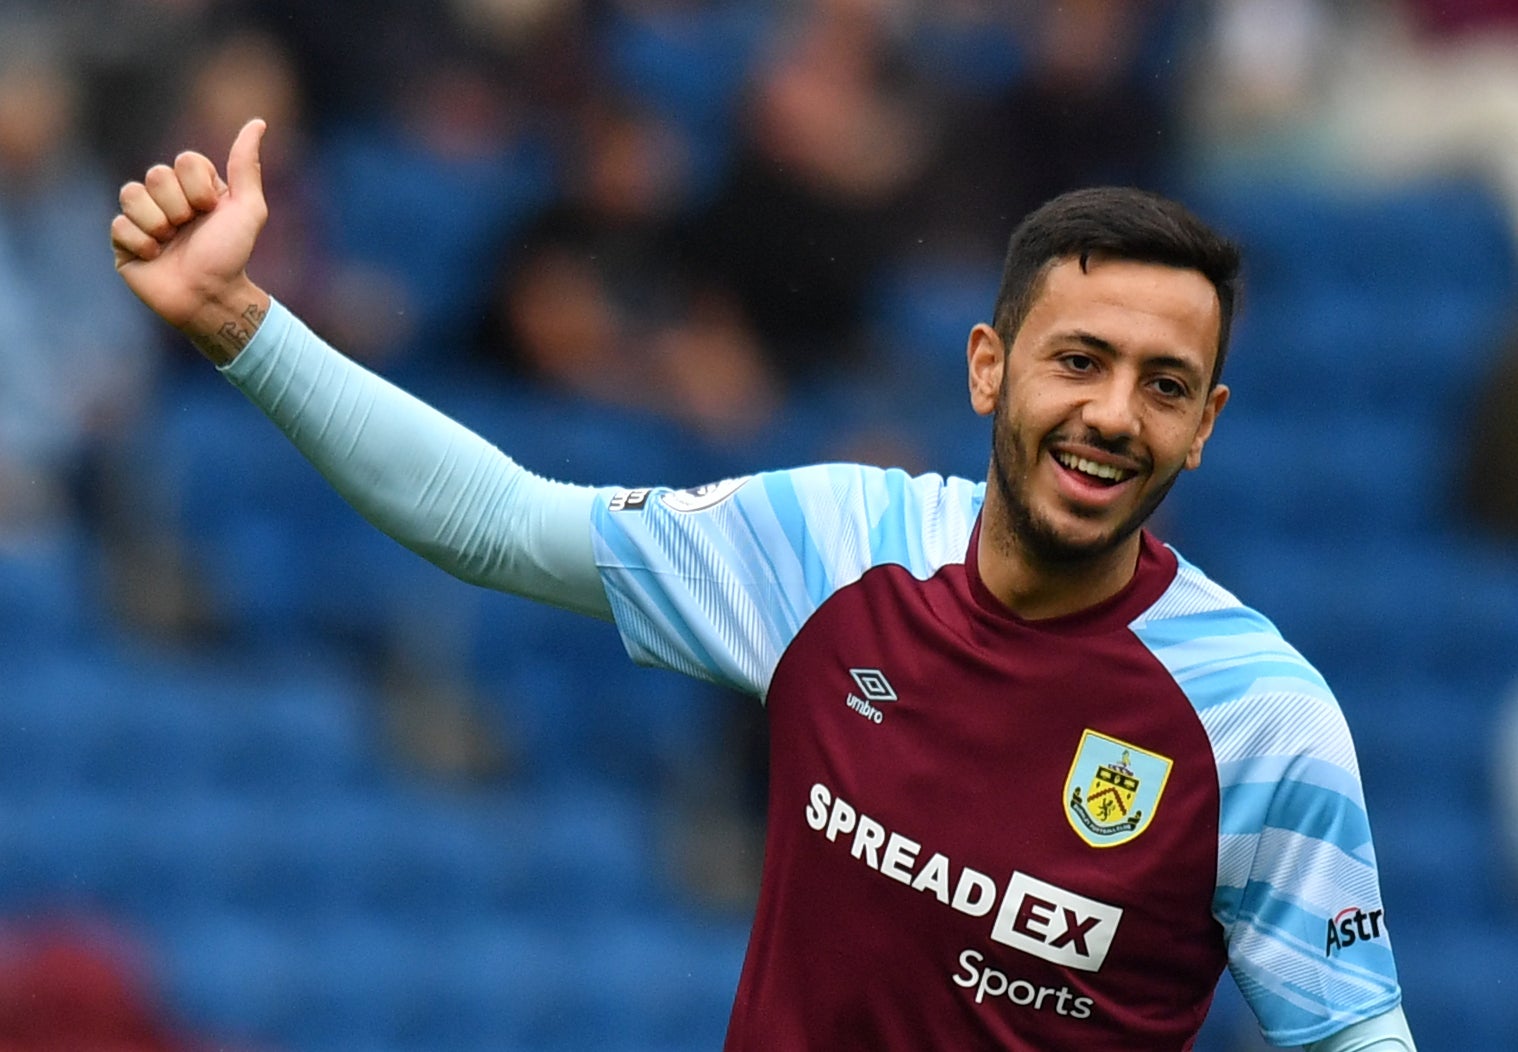 Sean Dyche says Burnley midfielder Dwight McNeil can continue to improve (Anthony Devlin/PA)